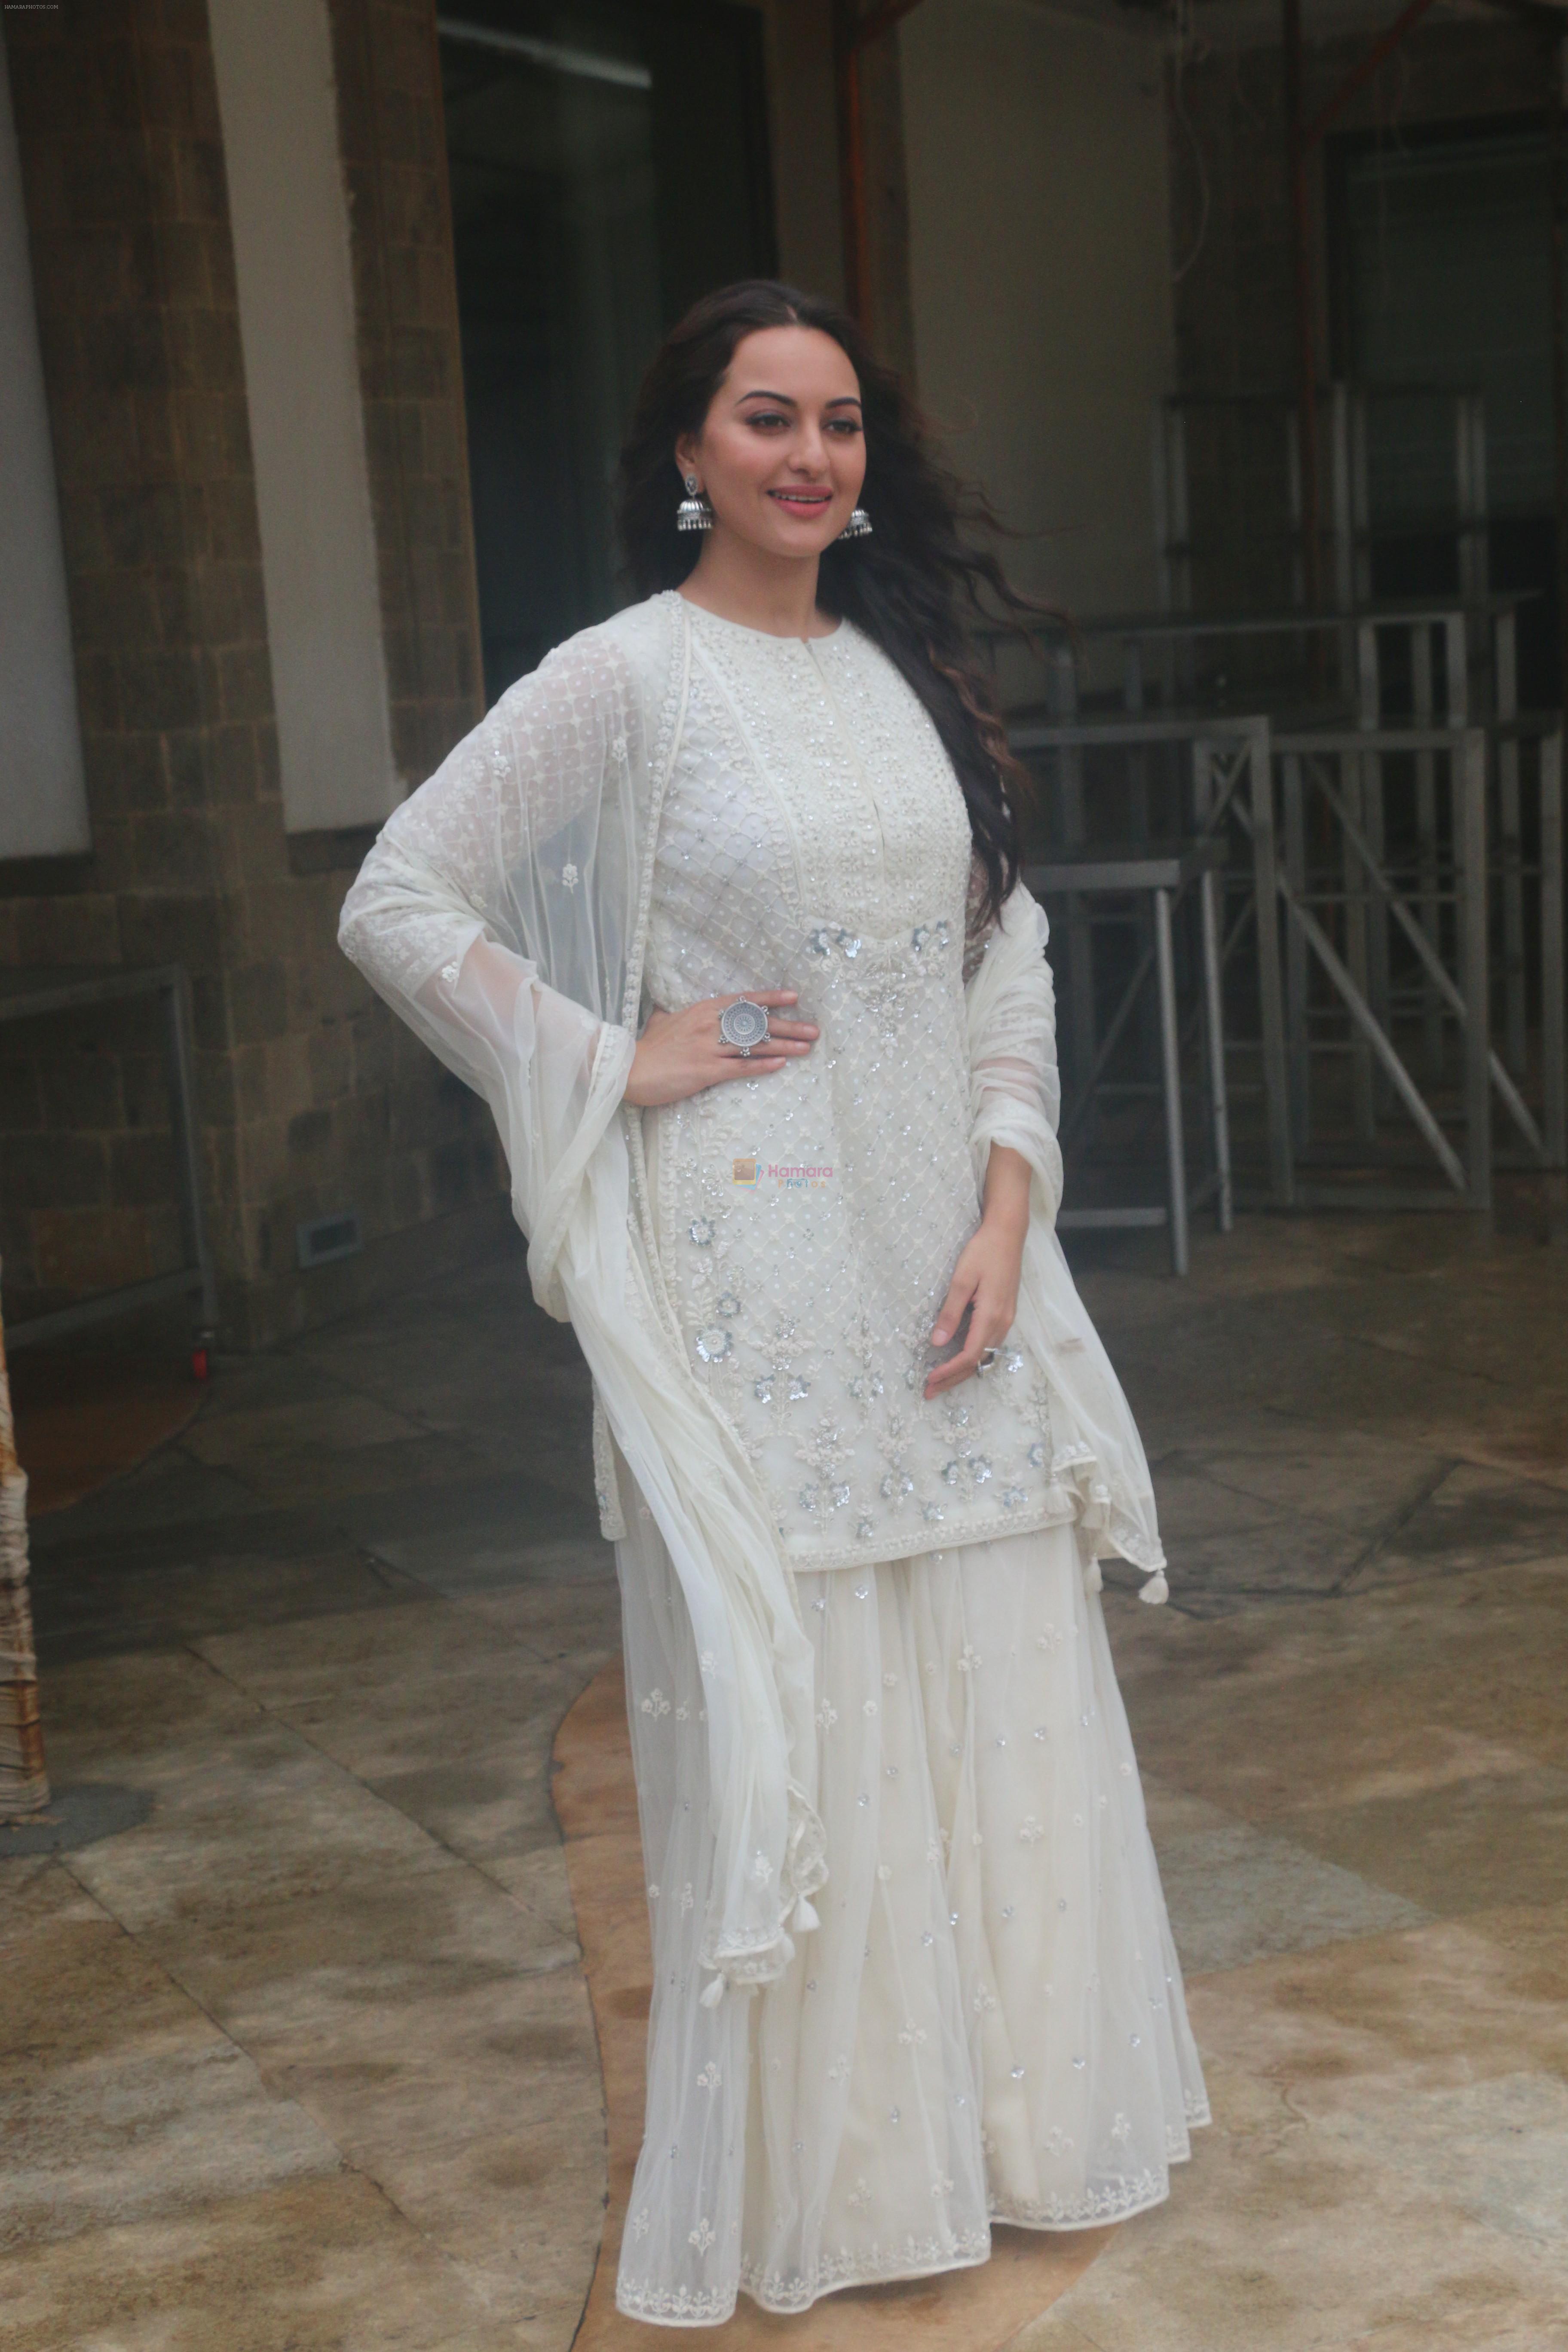 Sonakshi Sinha at the media interactions for her film Khandaani Shafakhana at Sun n Sand juhu on 8th July 2019